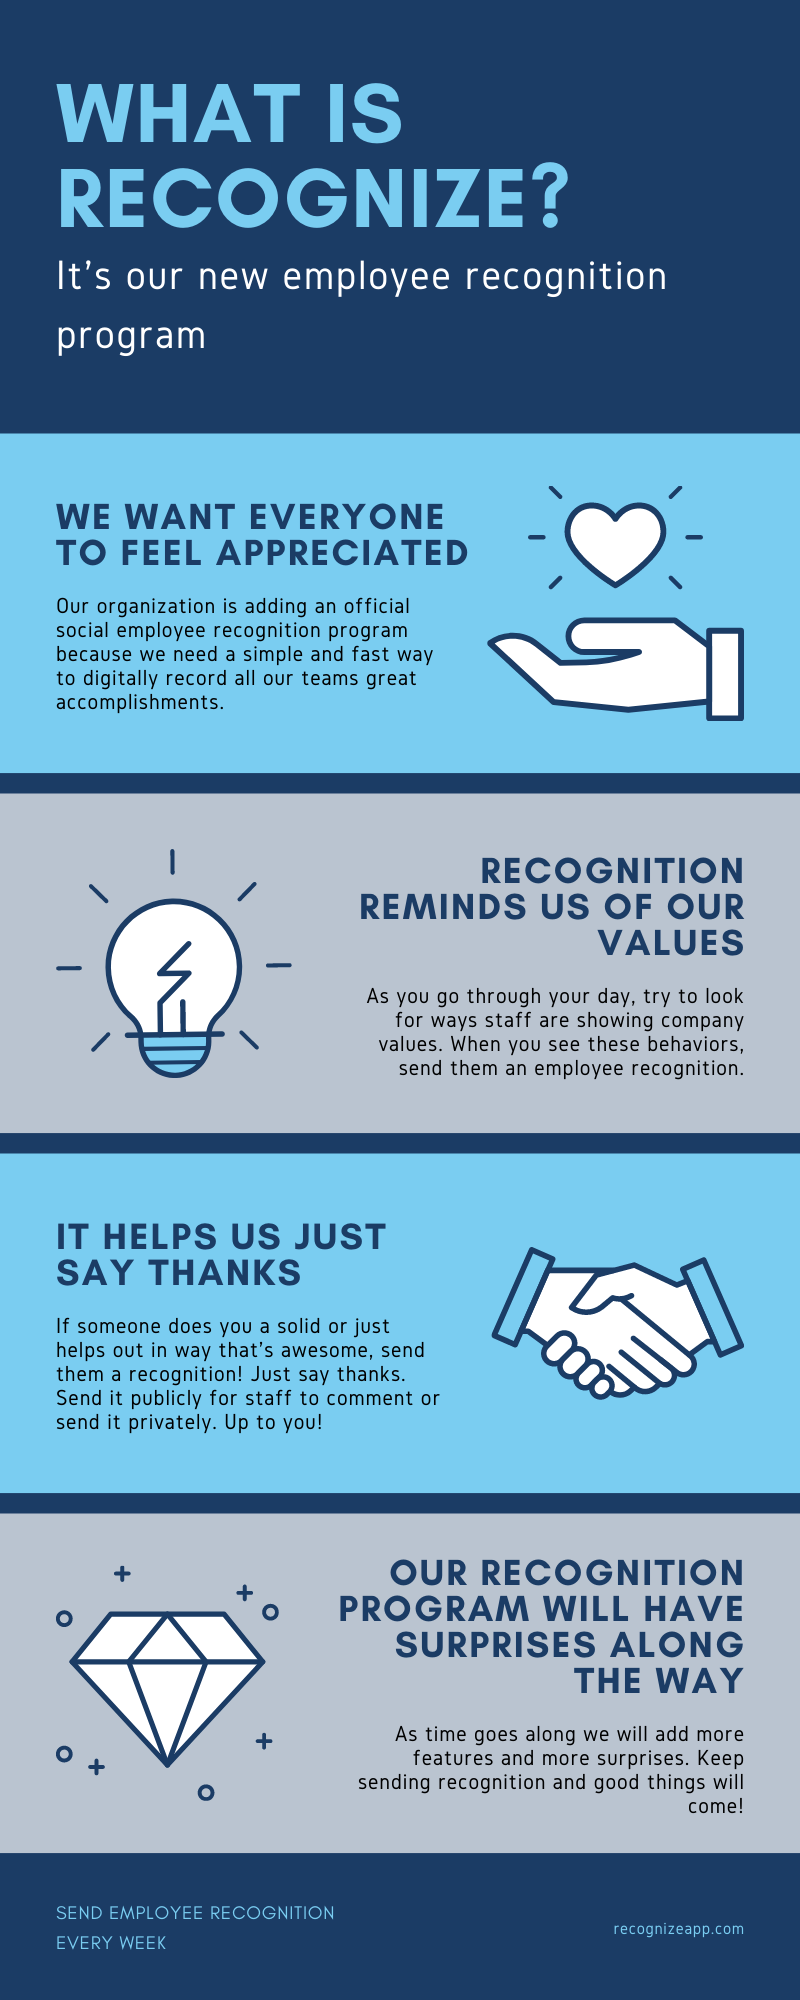 _Original_size__Simple_Steps_to_Employee_Recognition__1_.png